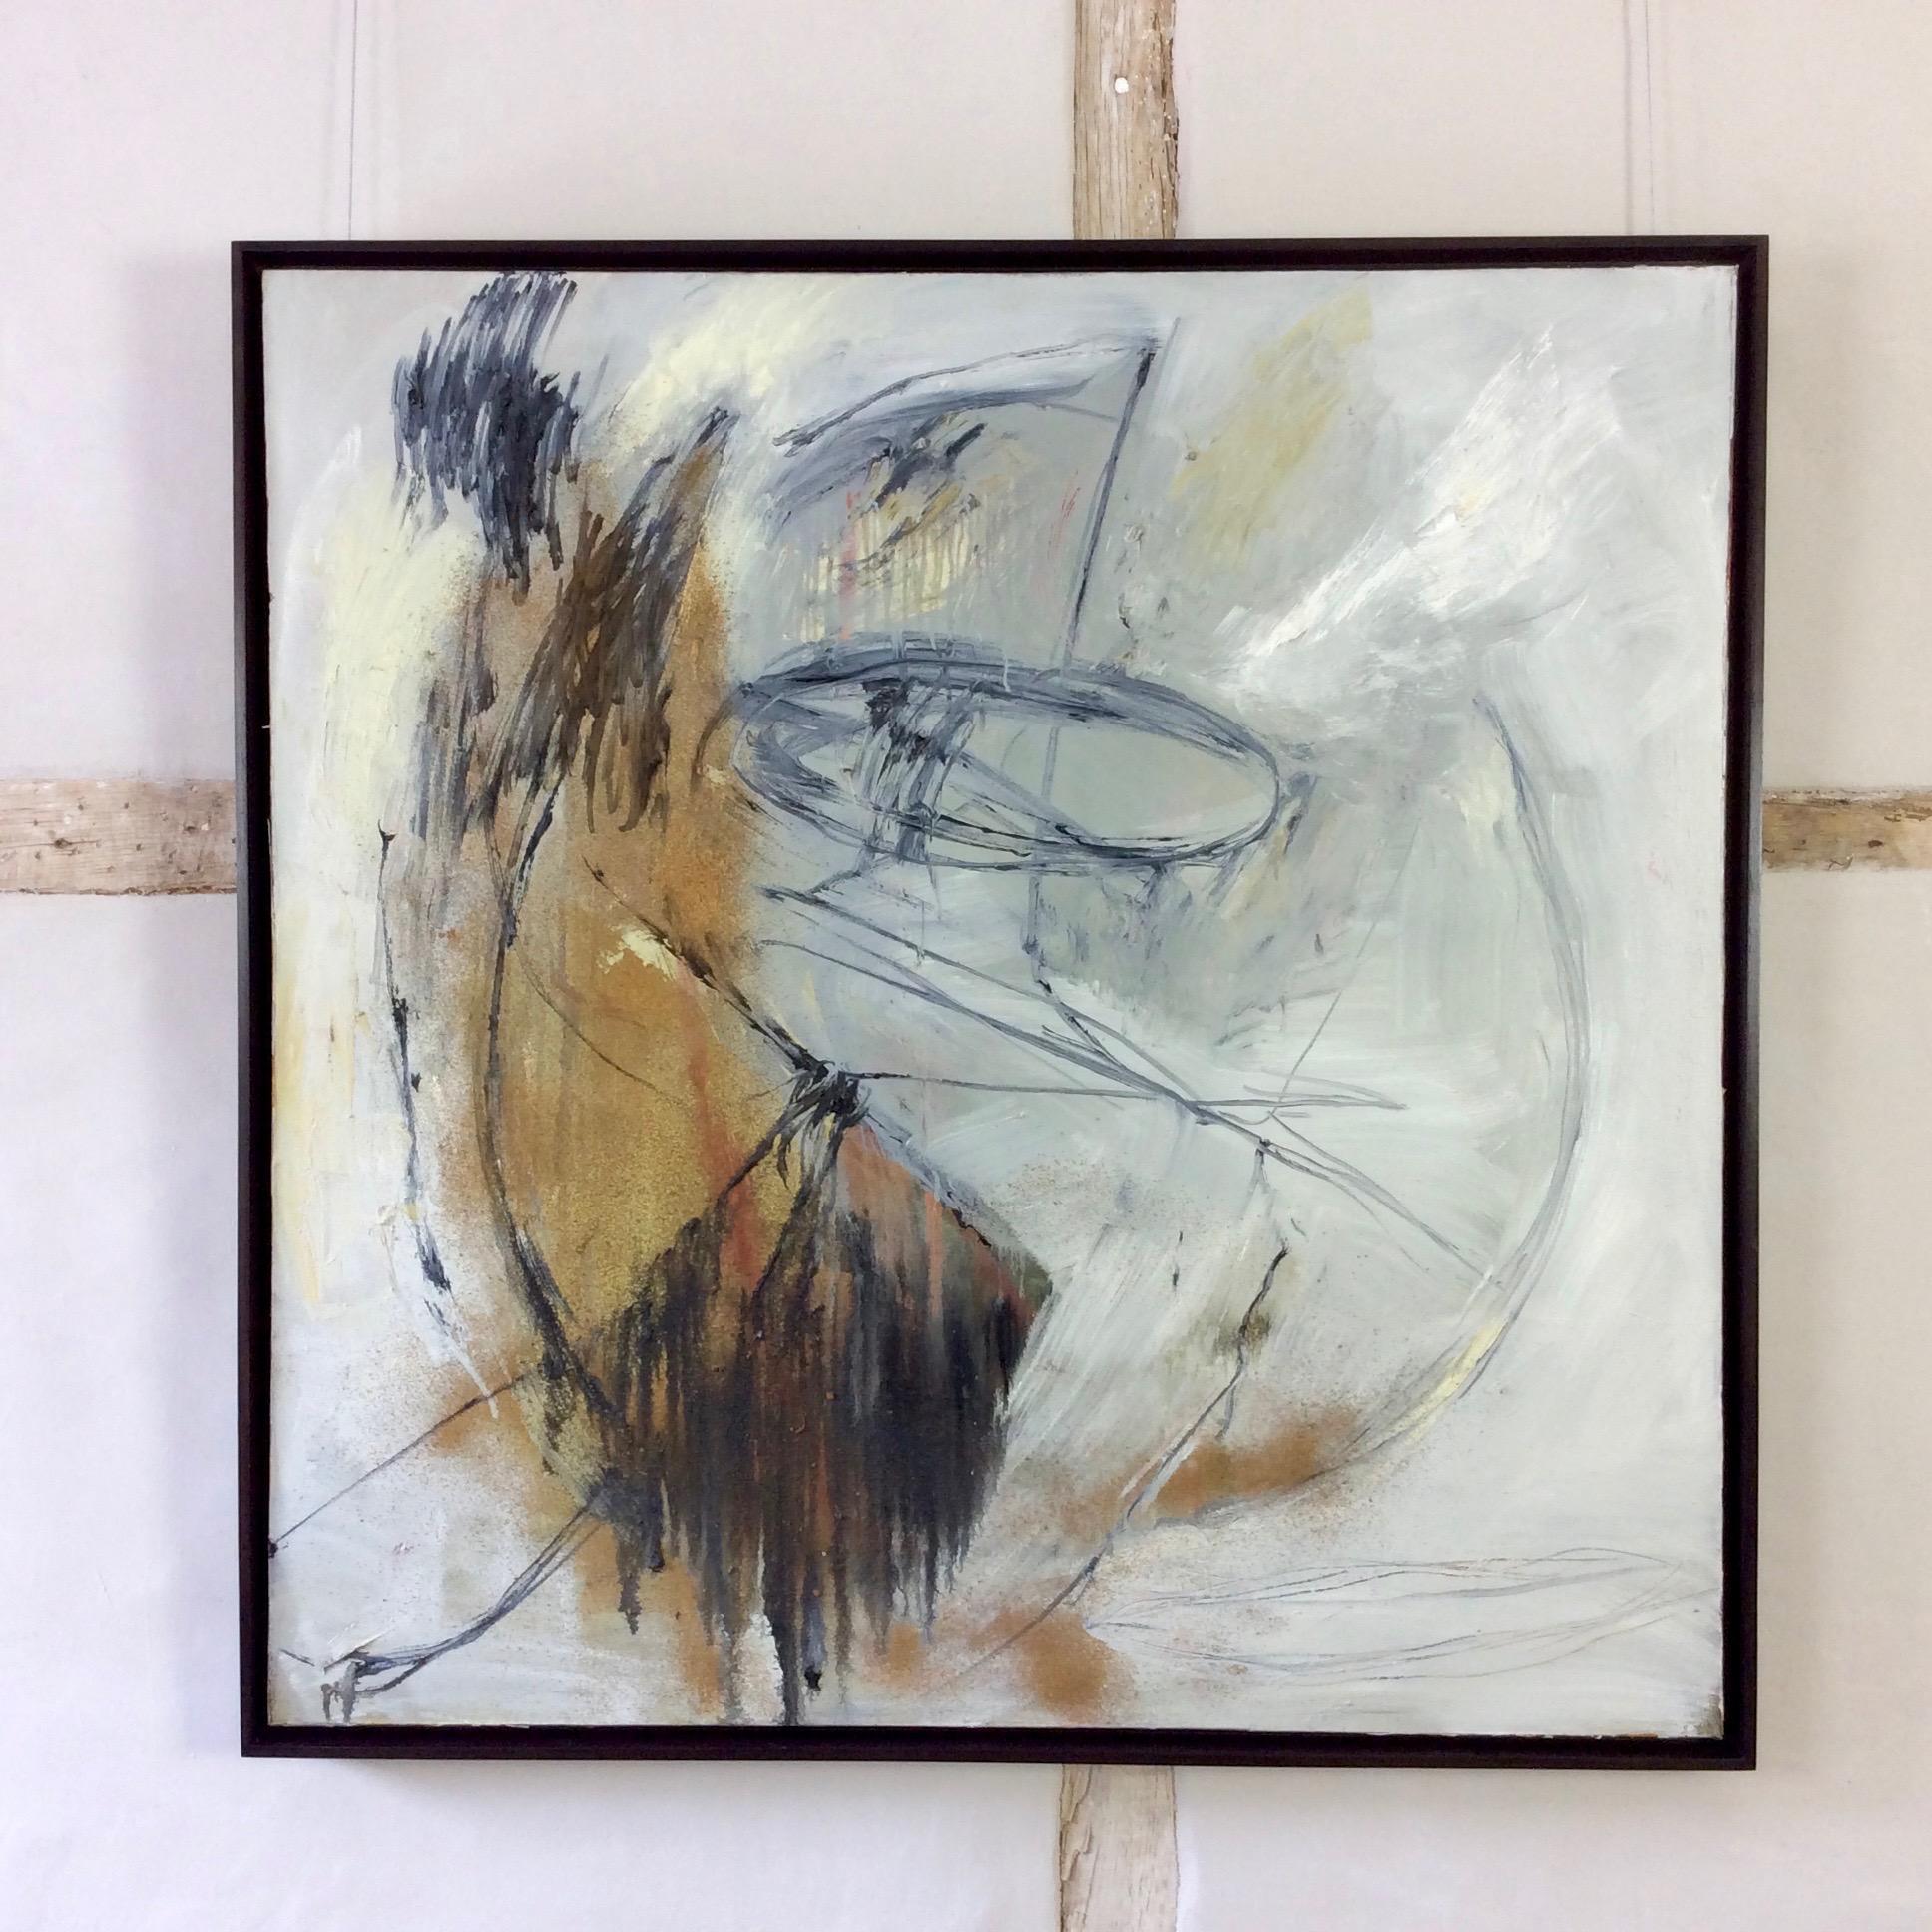 Broken Circle - large expressive abstract painting, Jerwood - Painting by Madeleine Strindberg